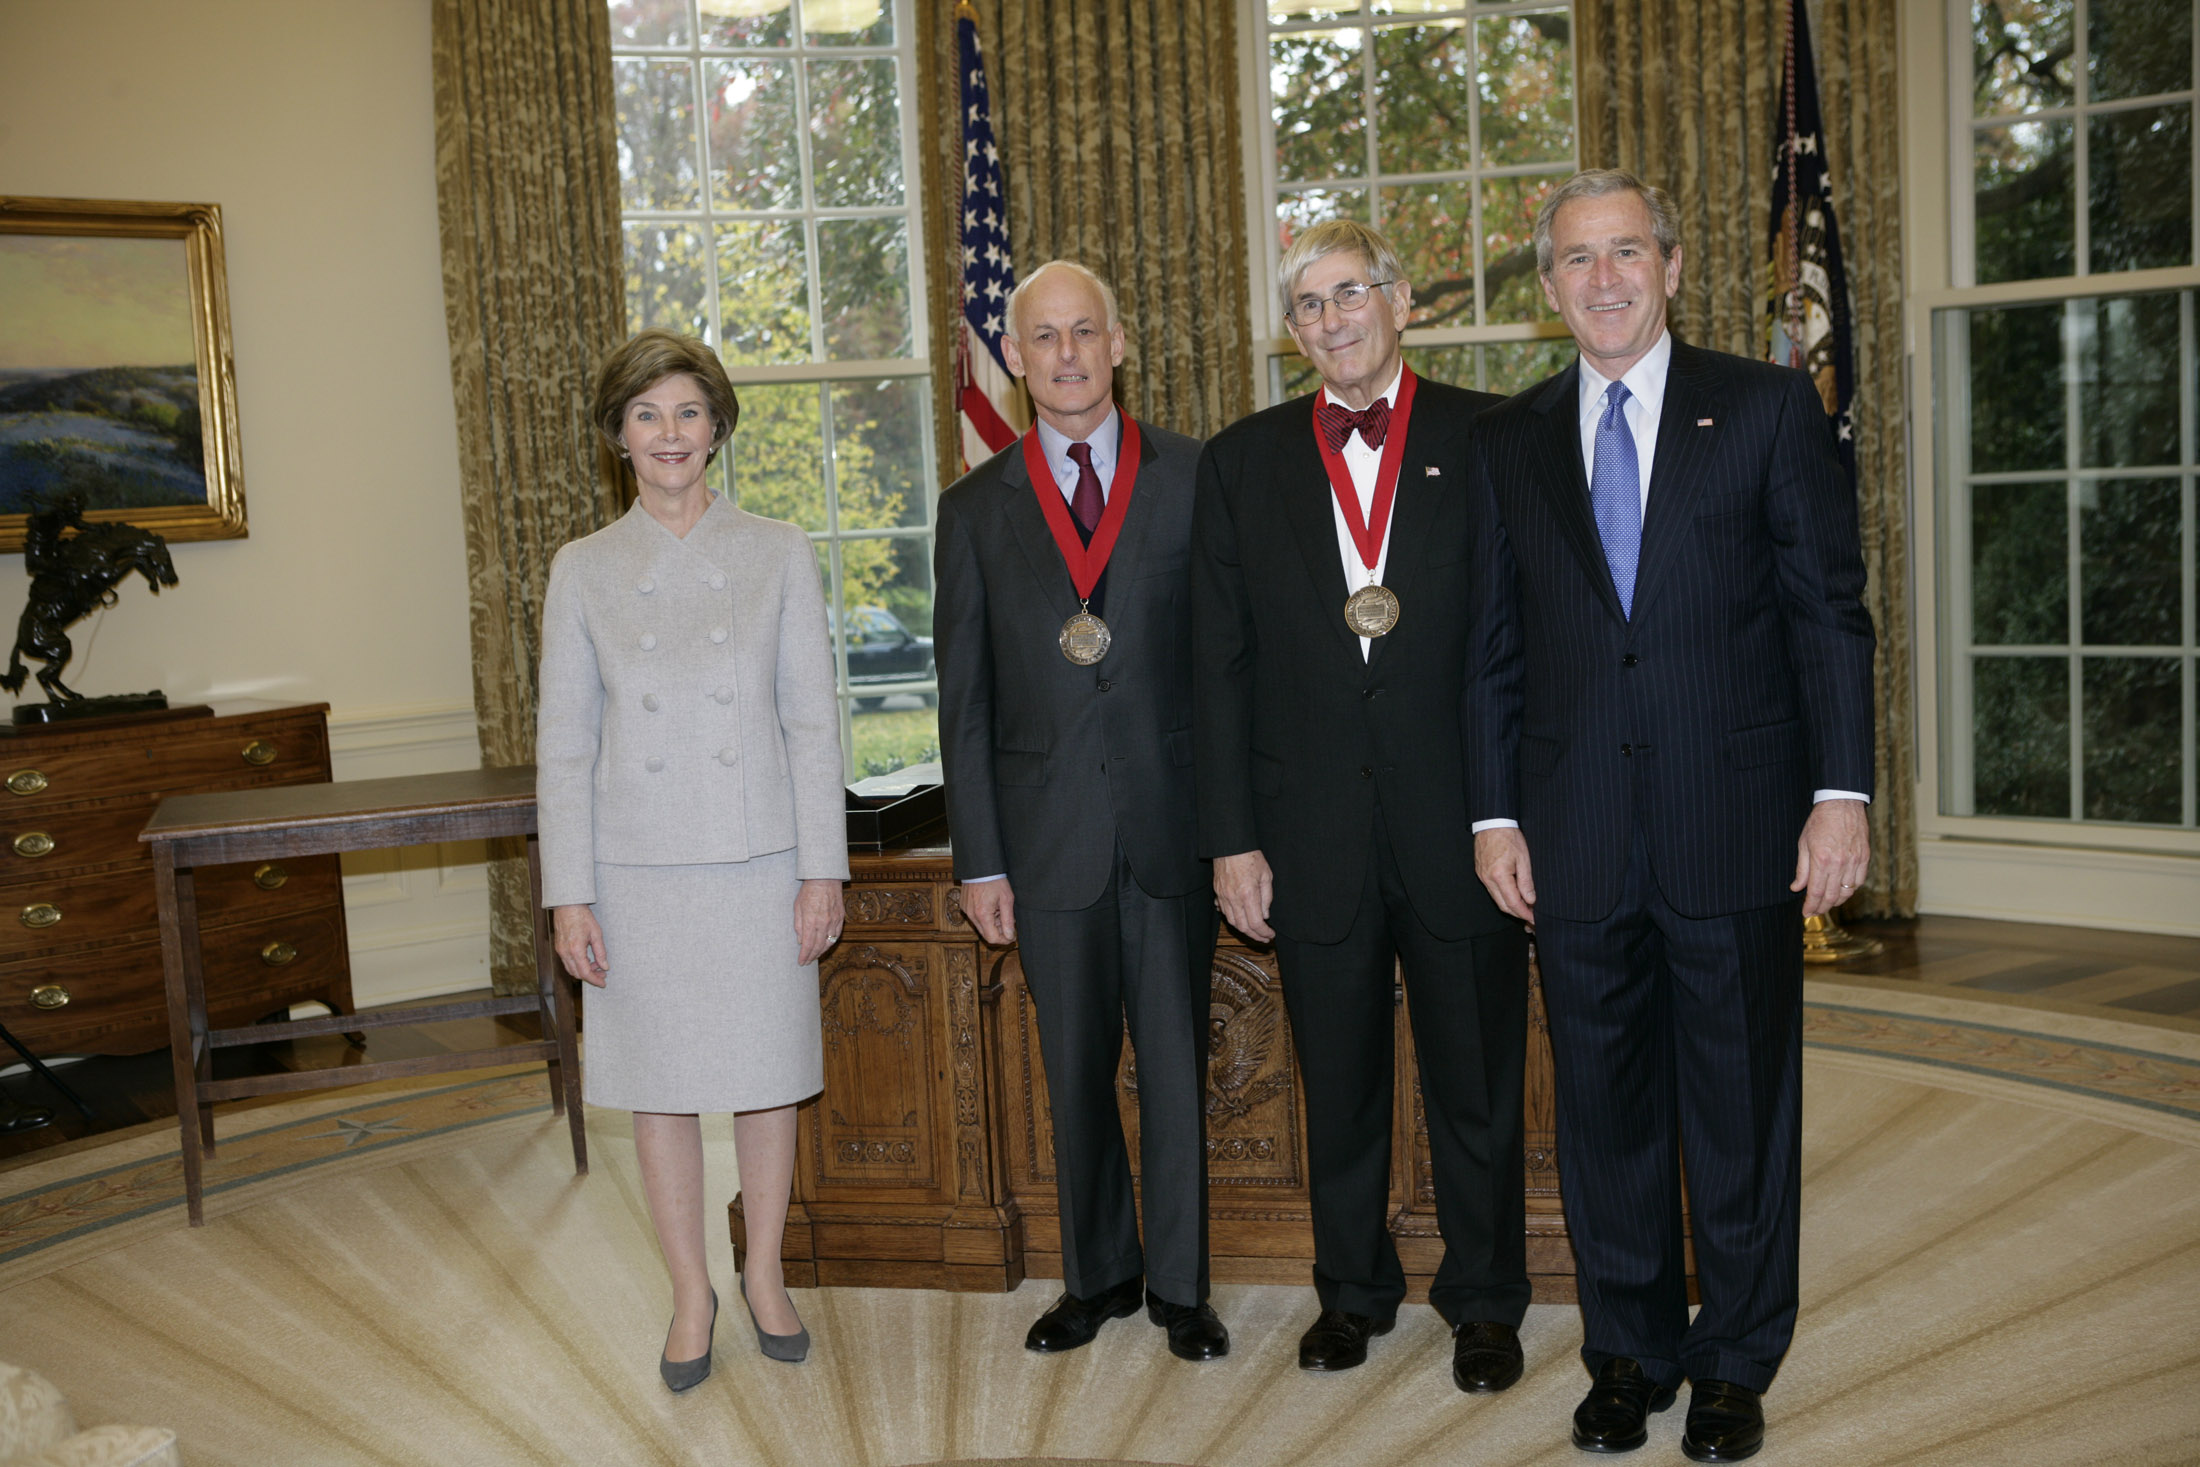 Lewis Lehrman and Richard Gilder receive the 2005 National Humanities Medal at the Whitehouse with President George W. Bush and First Lady Laura Bush